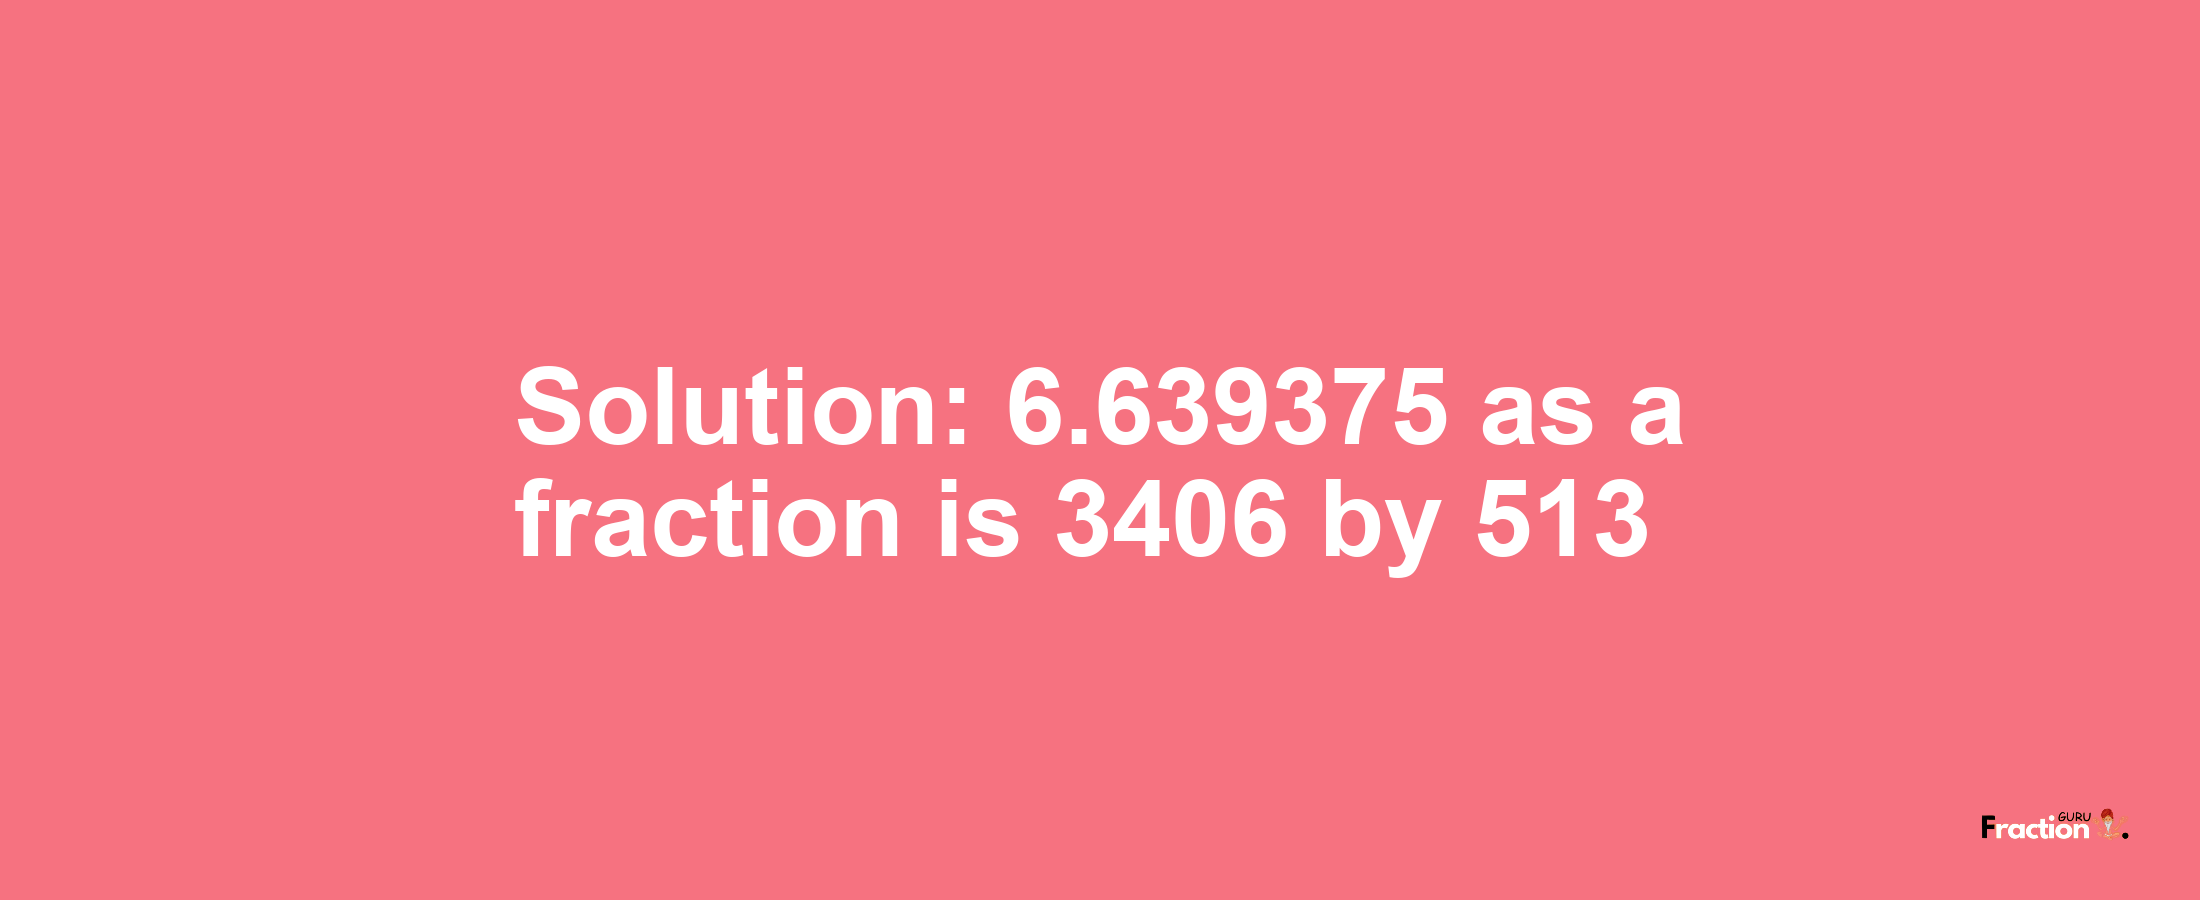 Solution:6.639375 as a fraction is 3406/513